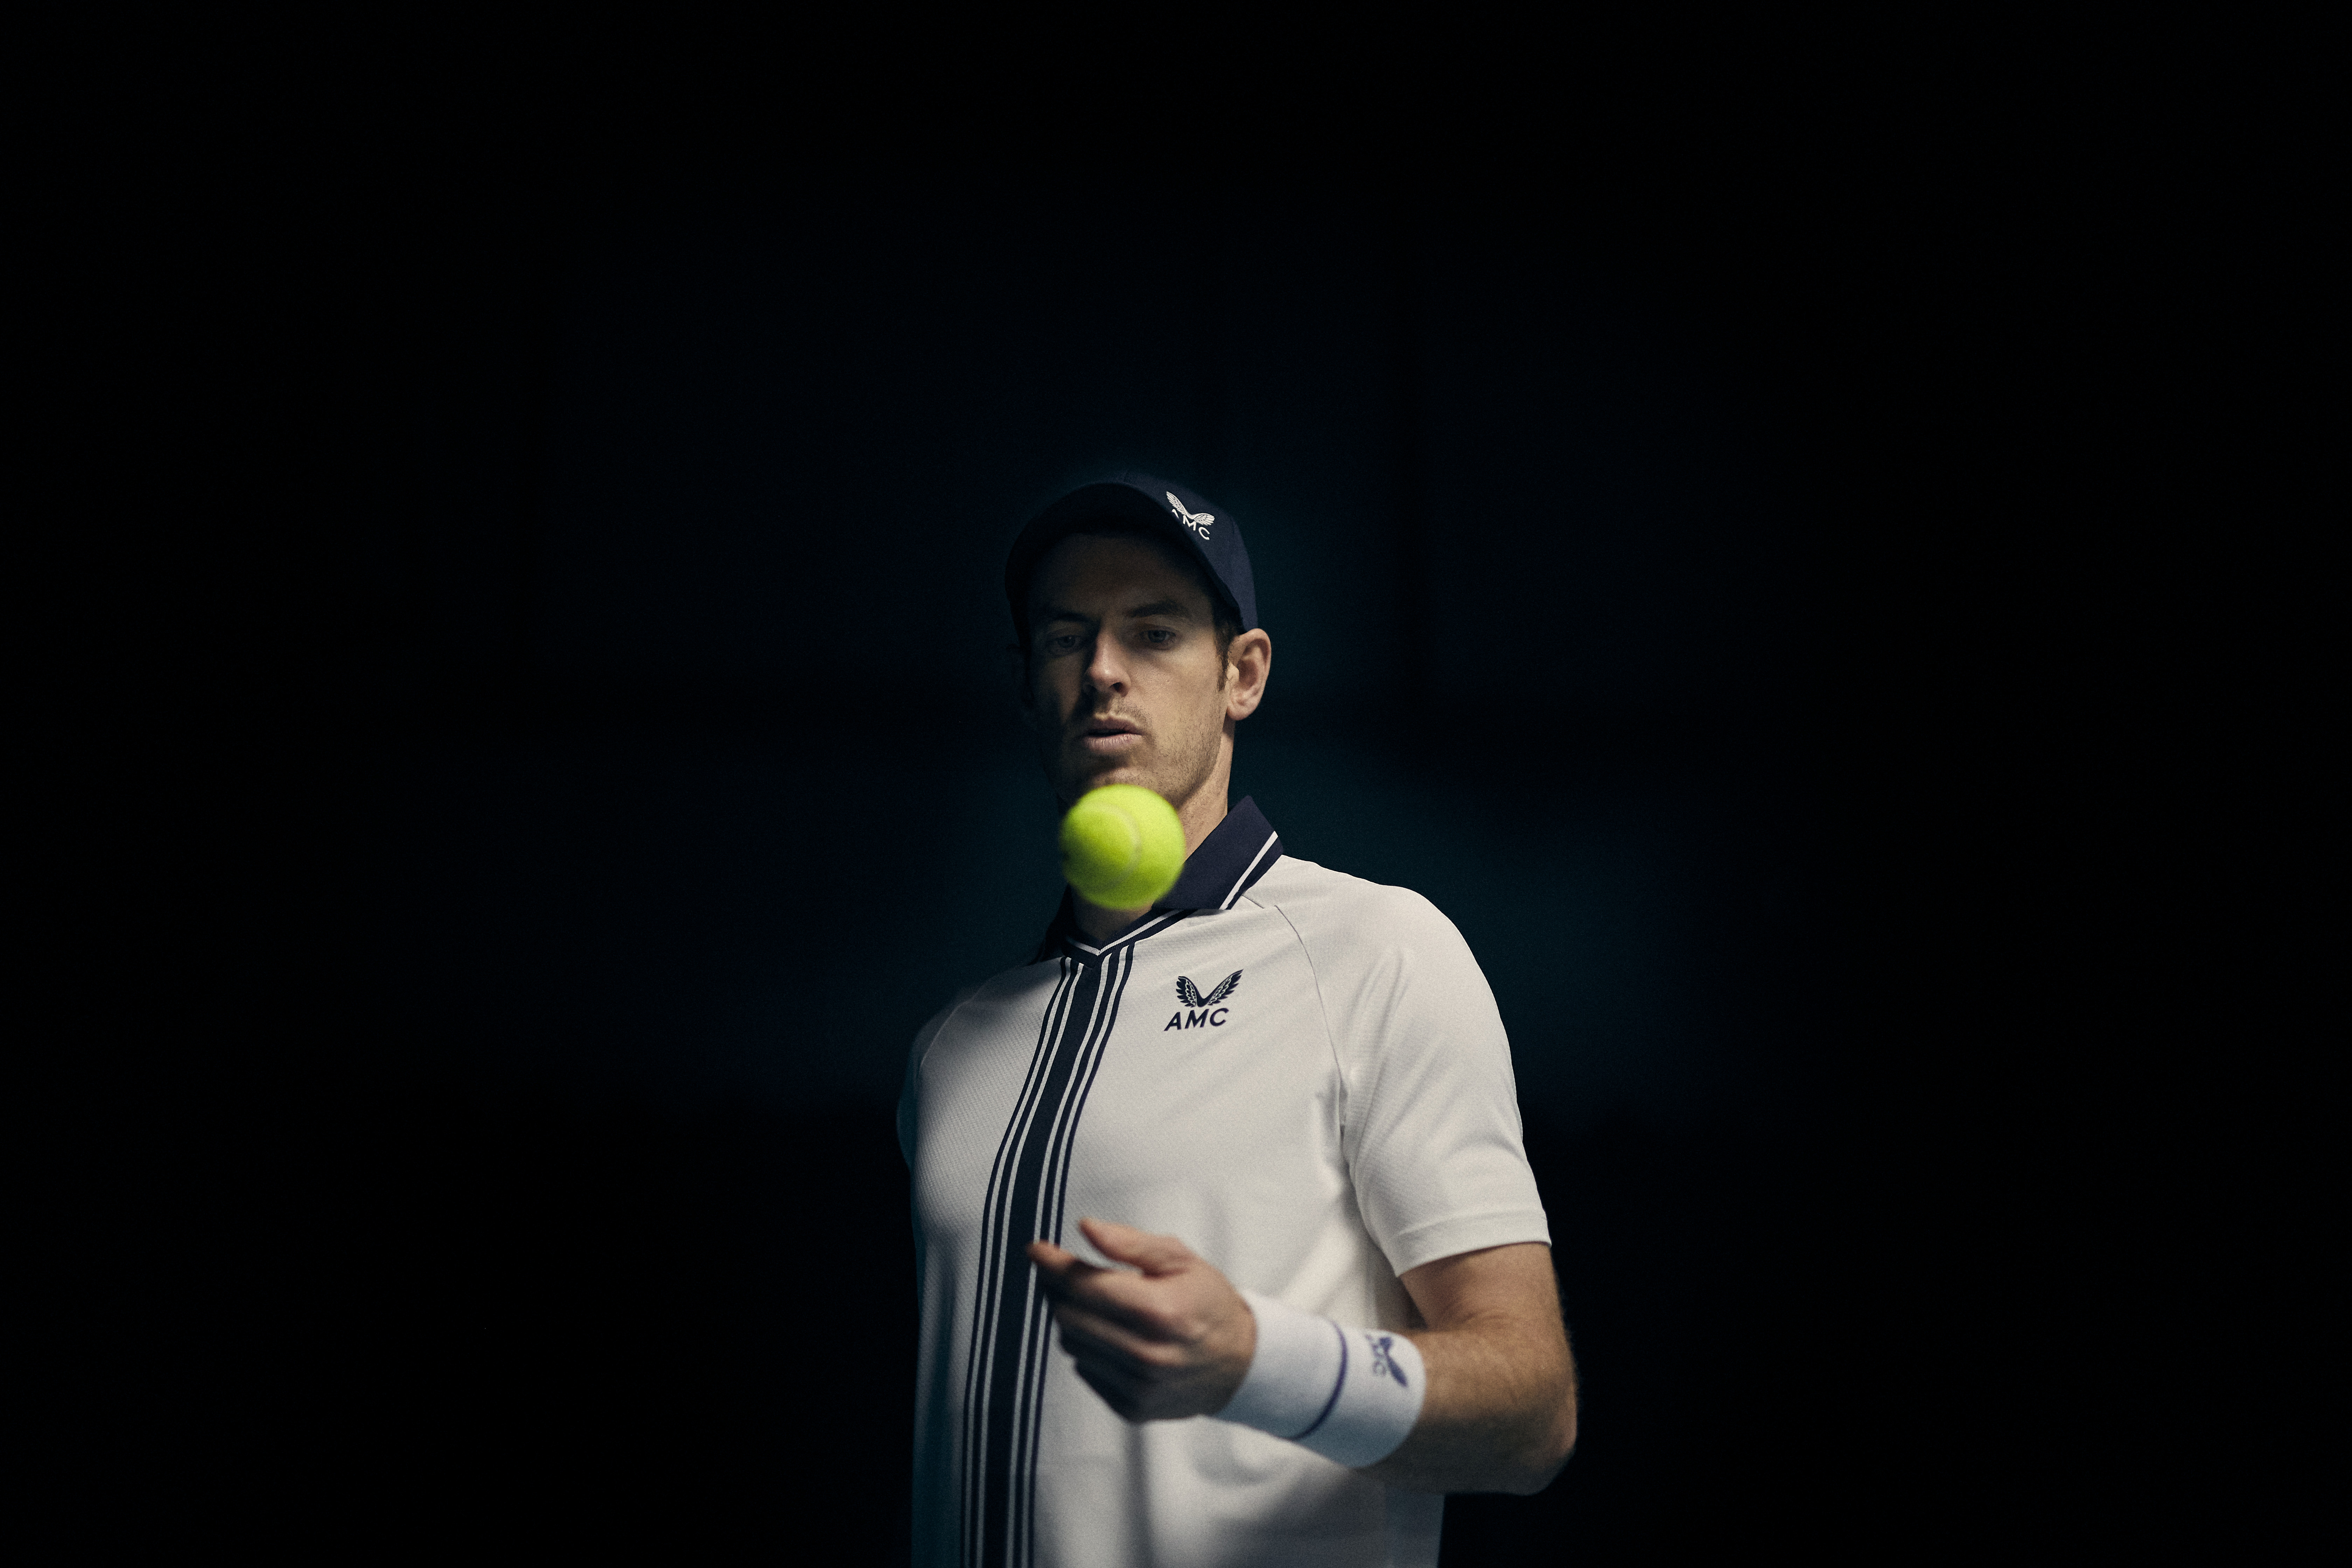 Andy Murray wears AMC by Castore